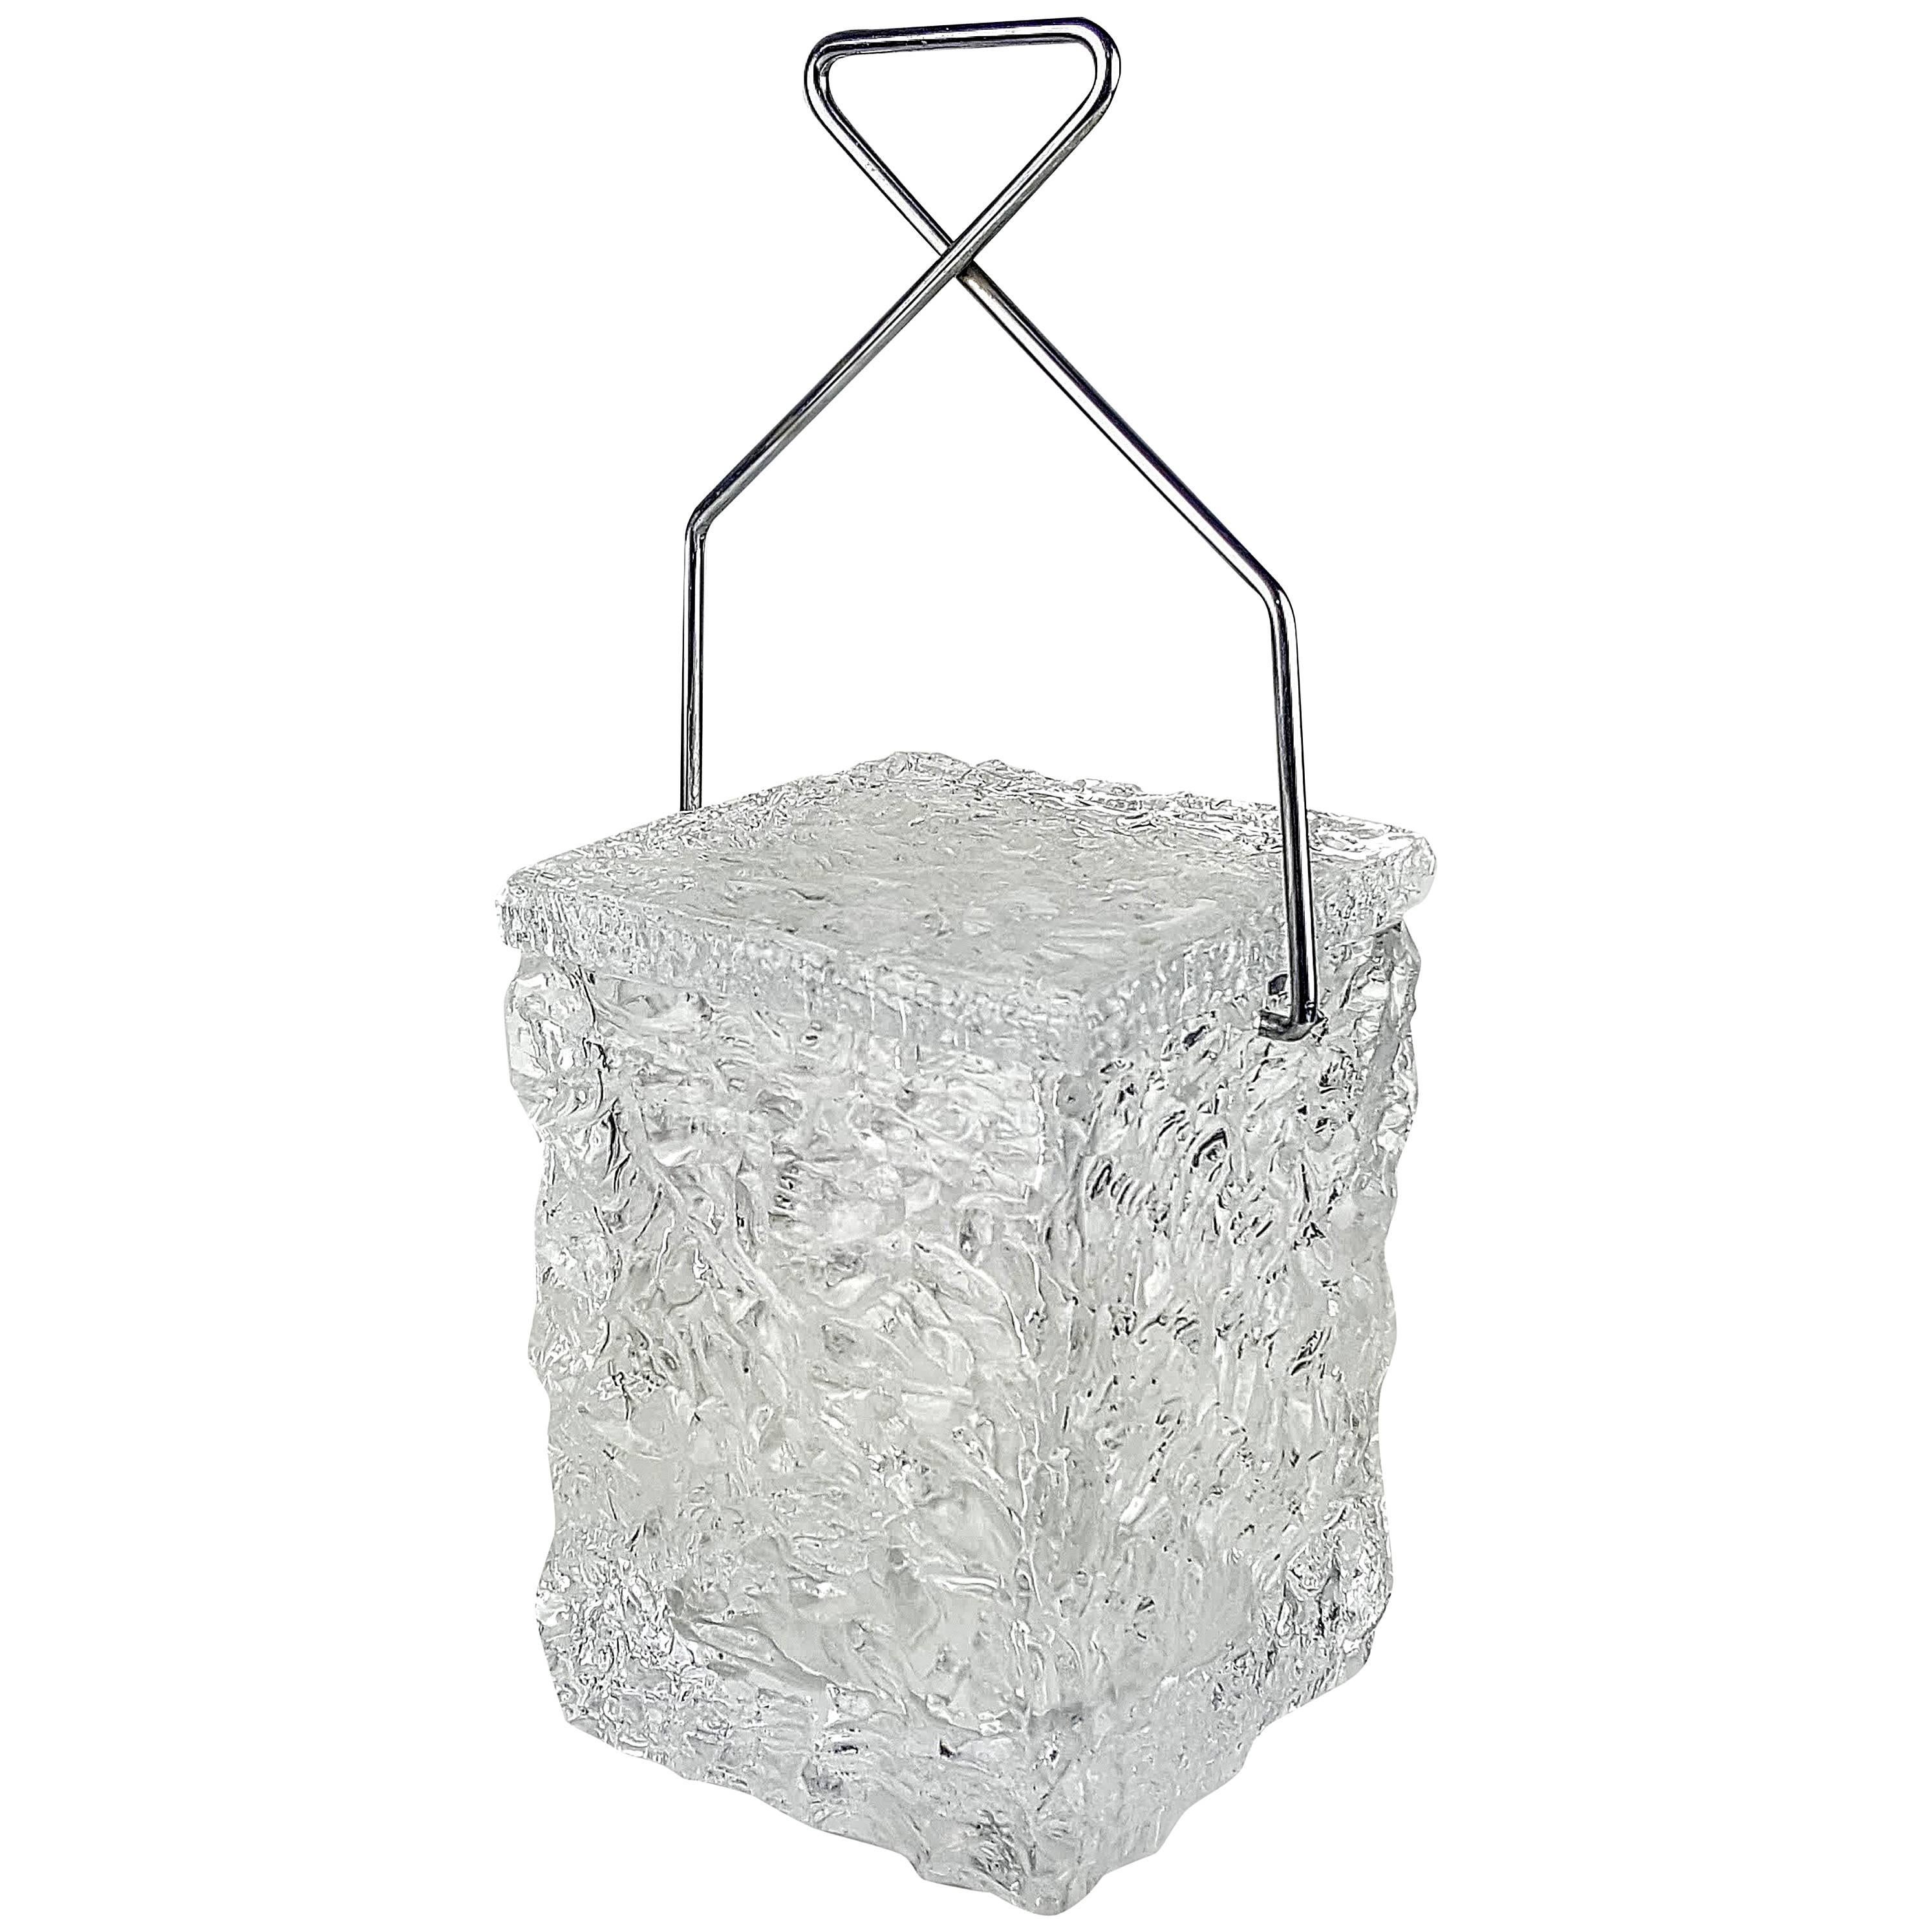 Playful "Block of Ice" Lucite Ice Bucket with Chrome Tong Handle by Wilardy